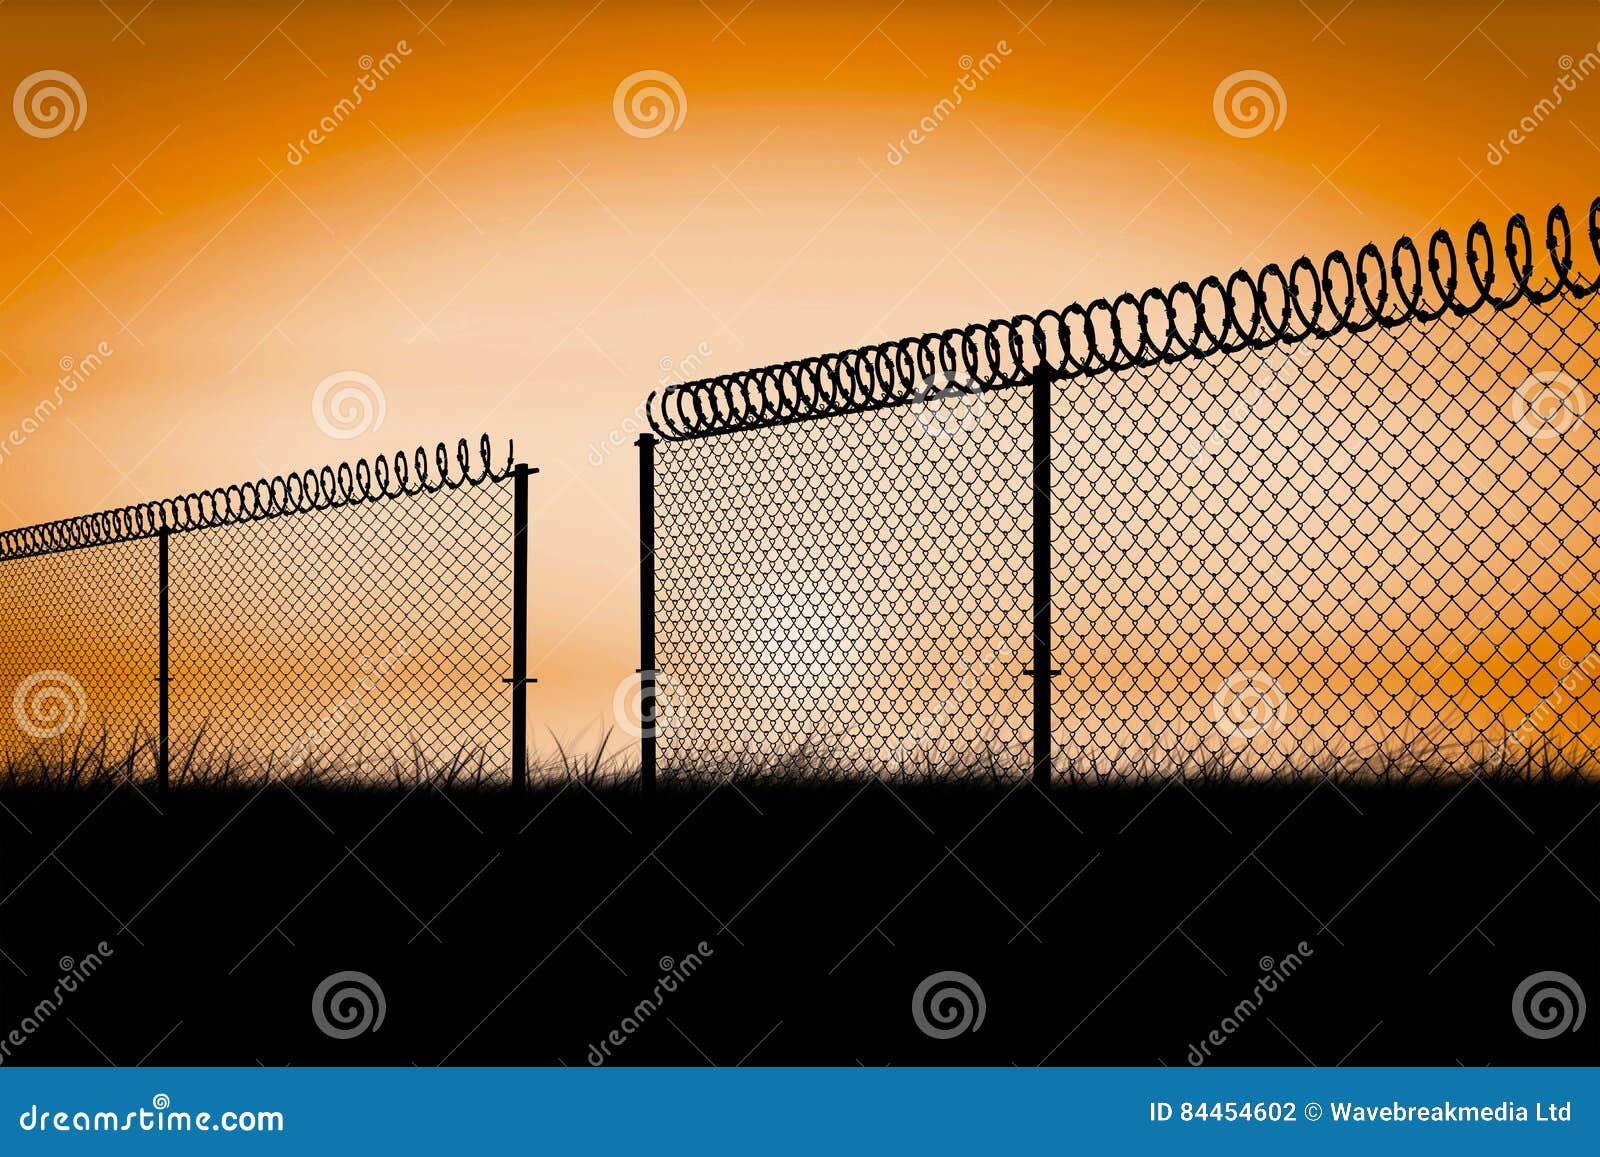 Composite Image Of Chainlink Fence Against White Background 3d Stock ...
